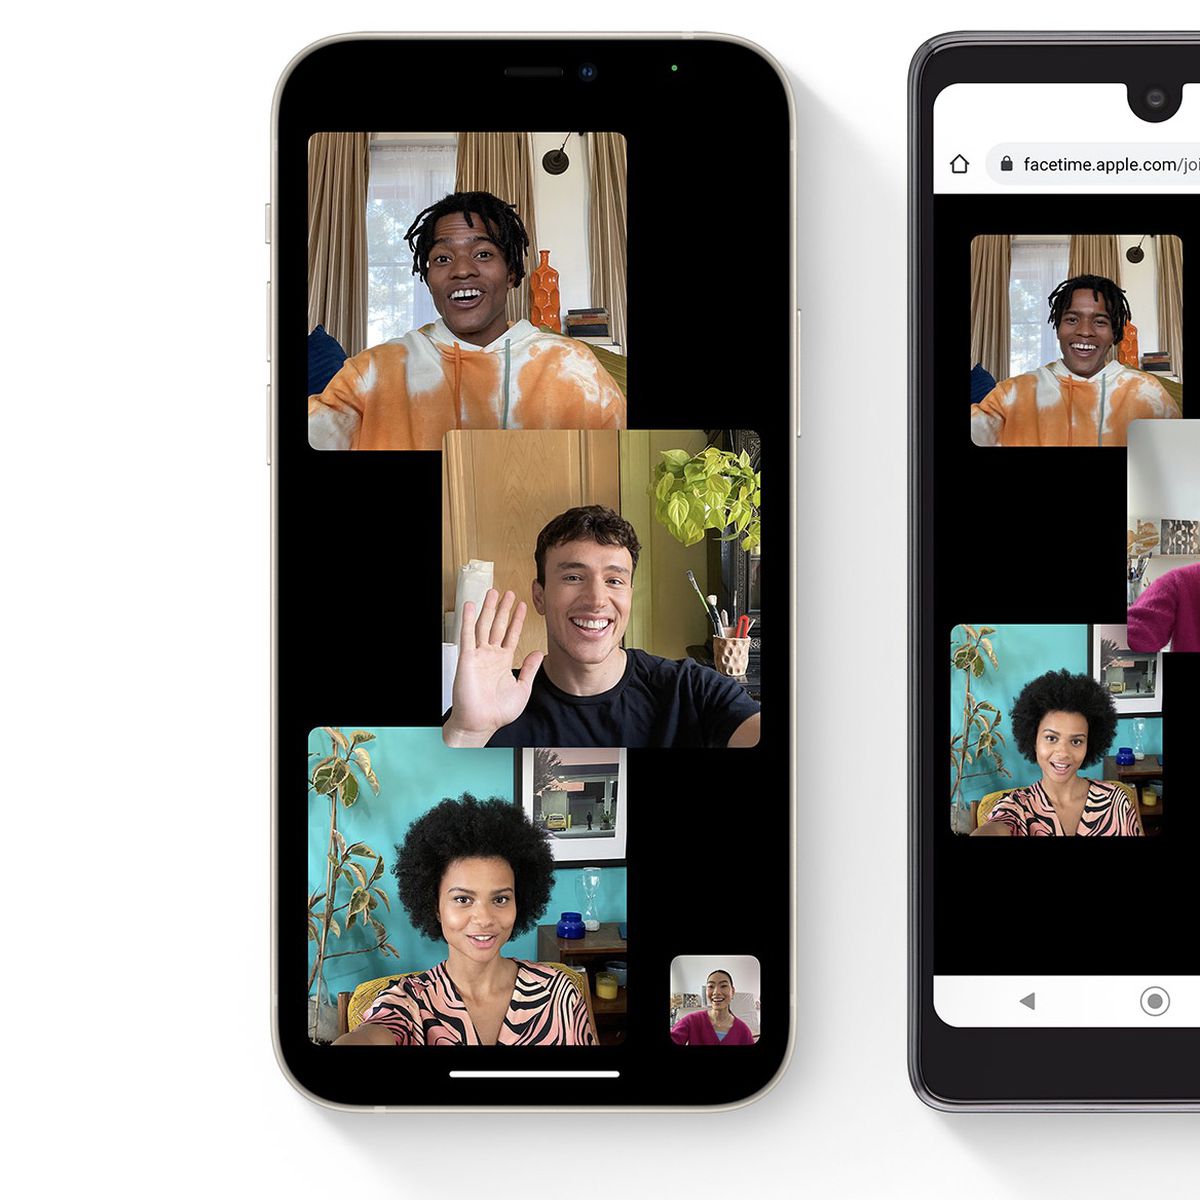 iOS 15 Brings FaceTime to PC and Android Users With New Option to Join on the Web - MacRumors